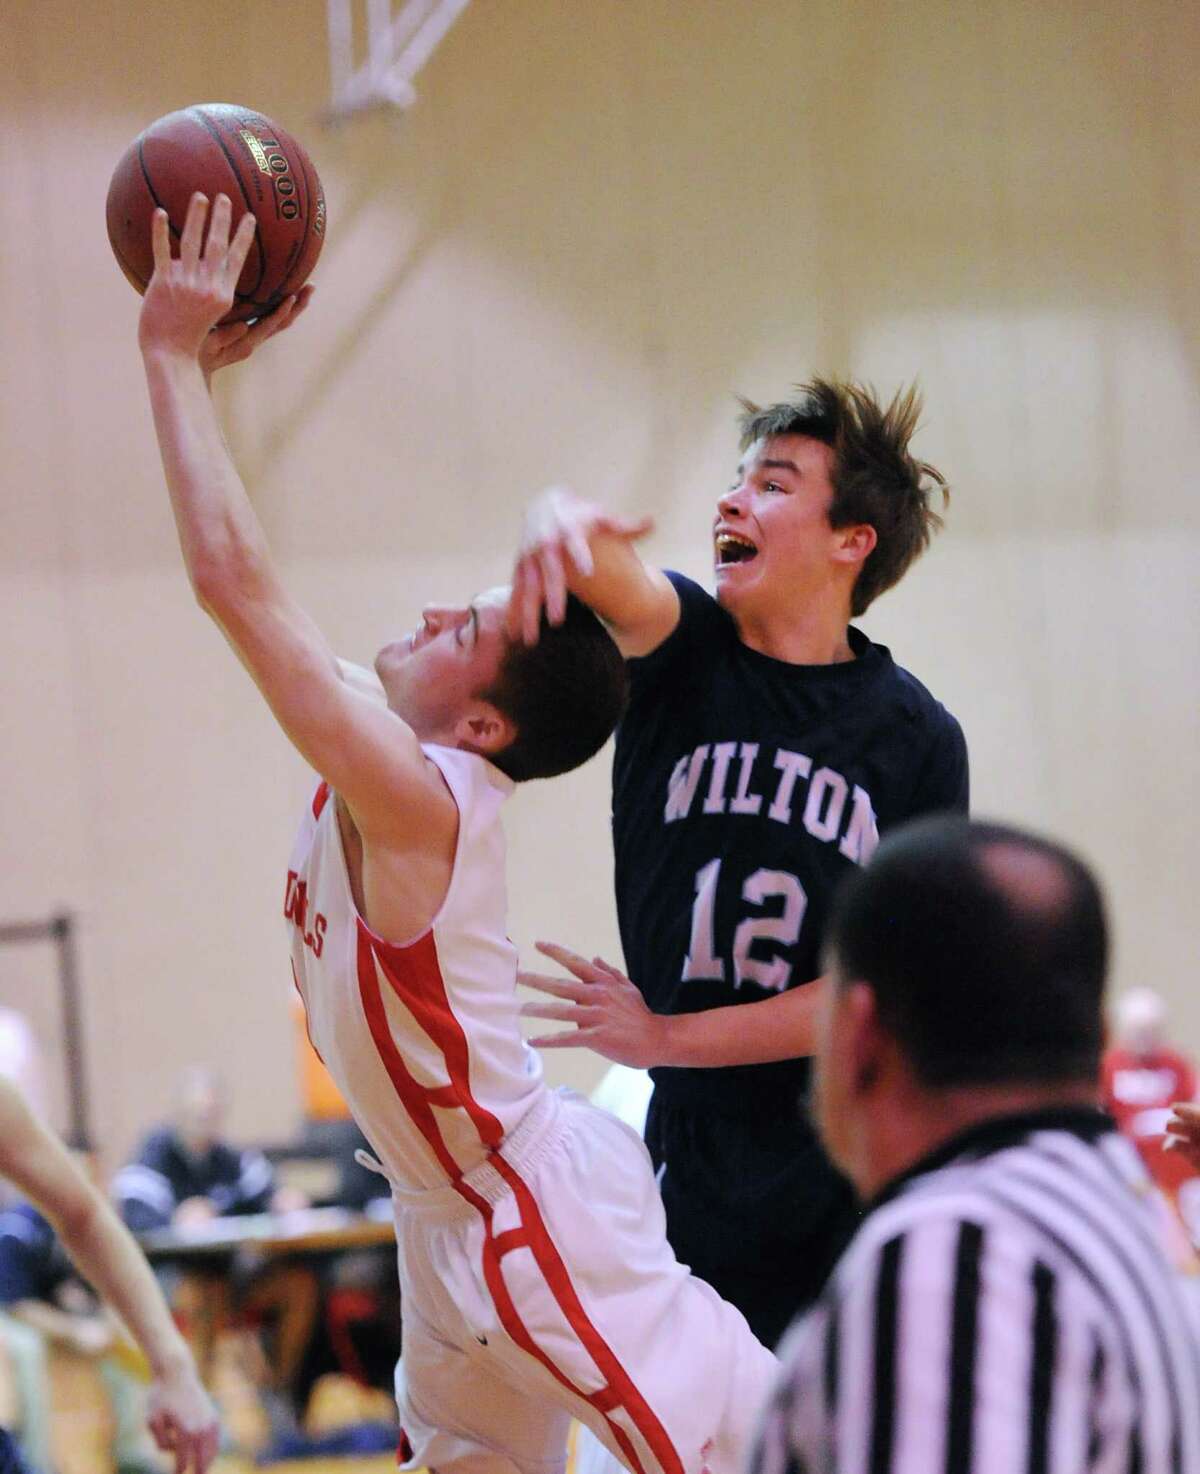 At left, Patrick Santini of Greenwich gets past Richie Williams (#12) of Wilton to score on a driving layup during the boys high school basketball game between Greenwich High School and Wilton High School at Greenwich, Firday night, Jan. 24, 2014.